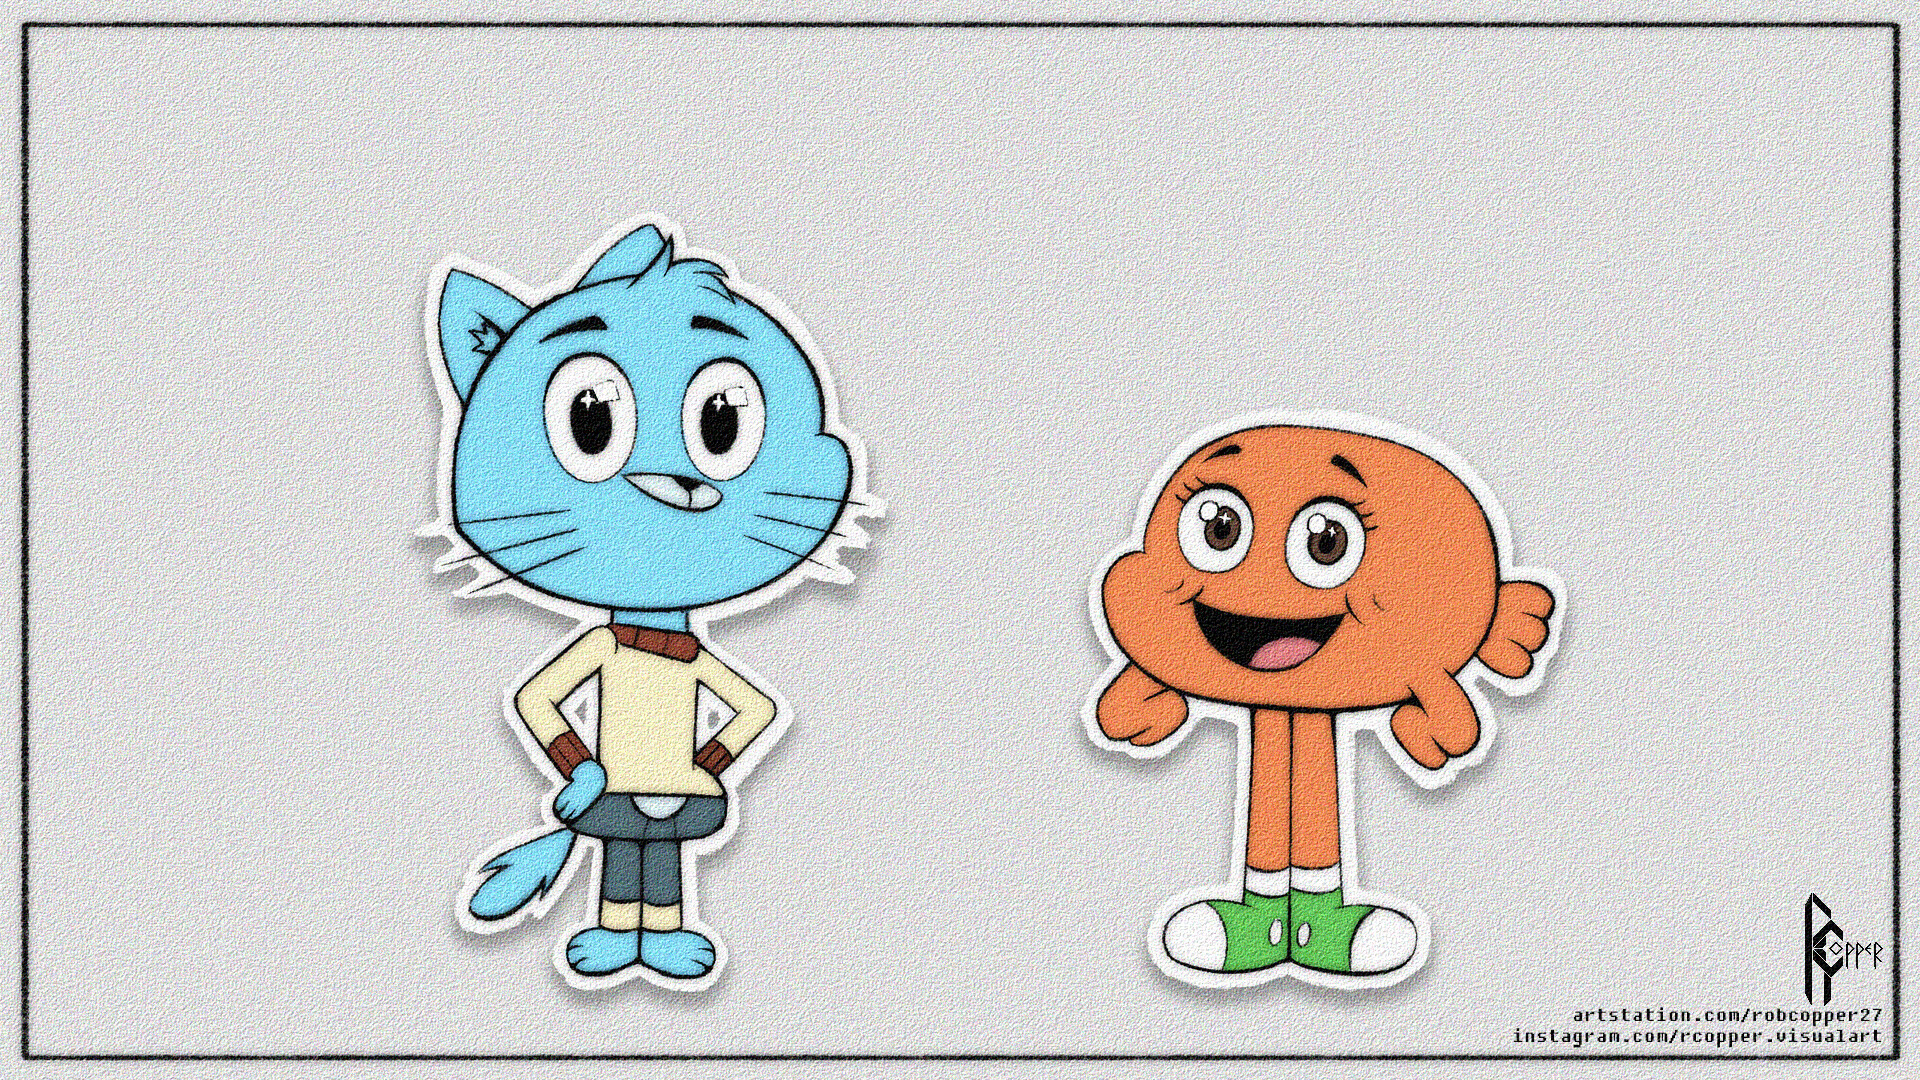 ArtStation - The Amazing World of Gumball in My Style